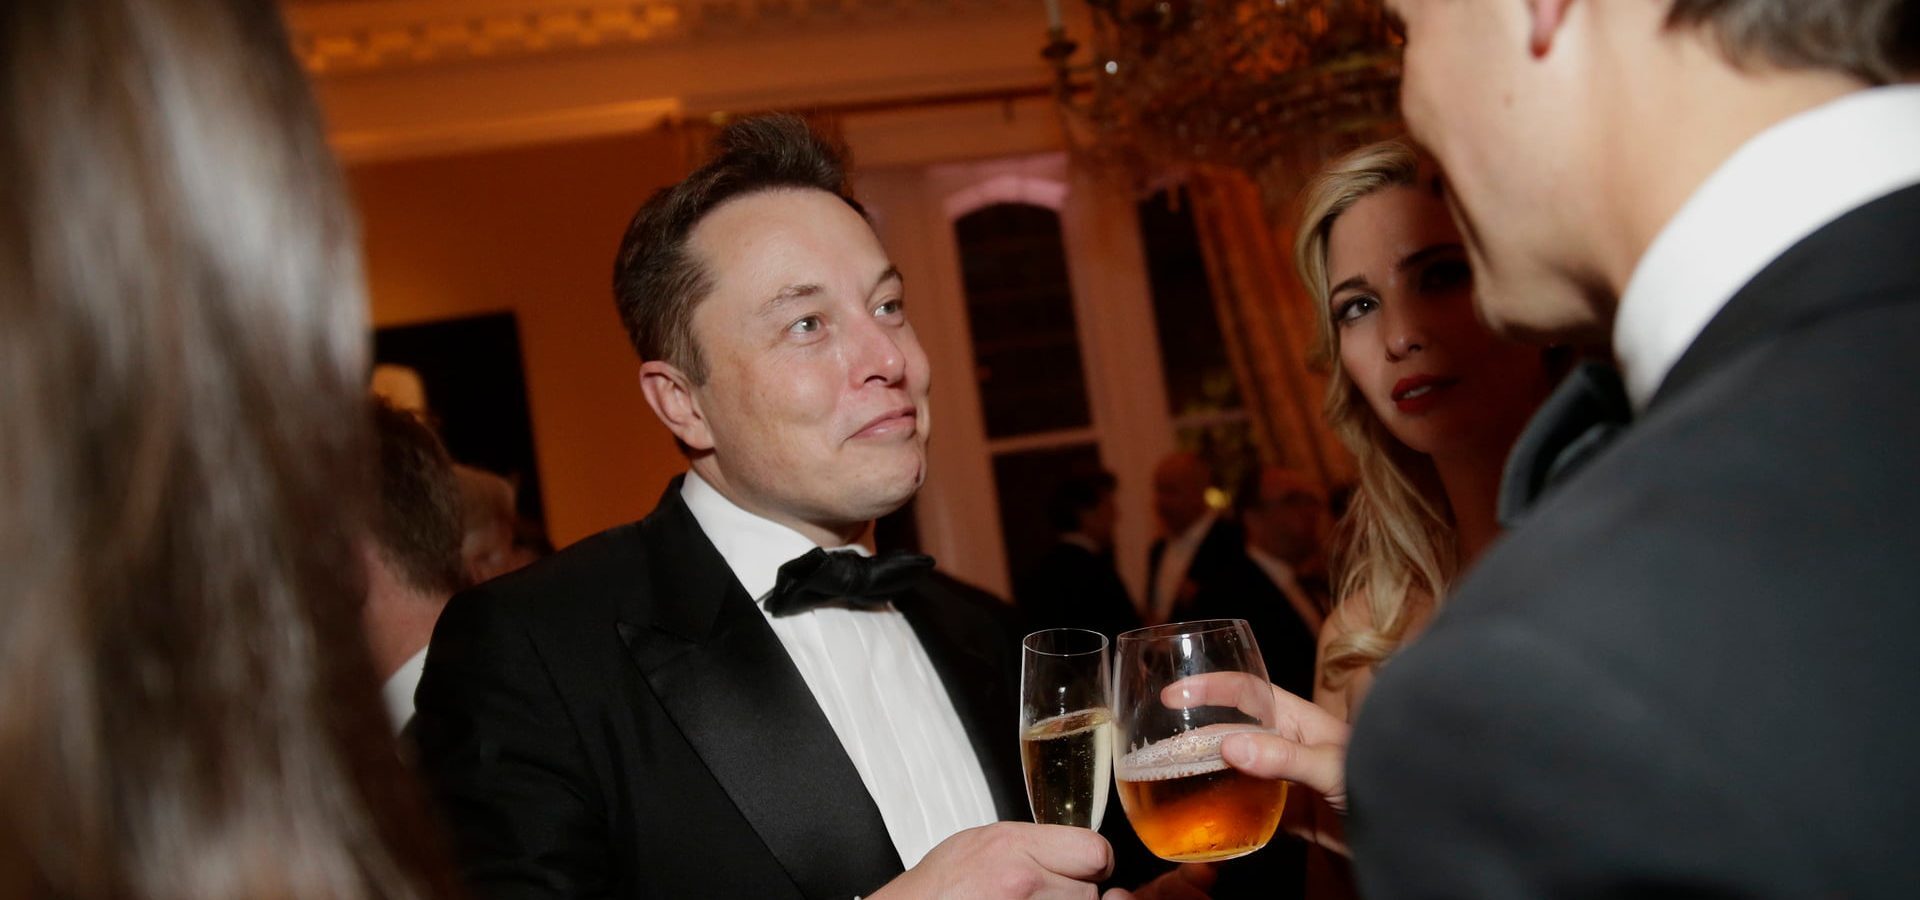 Musk at Party